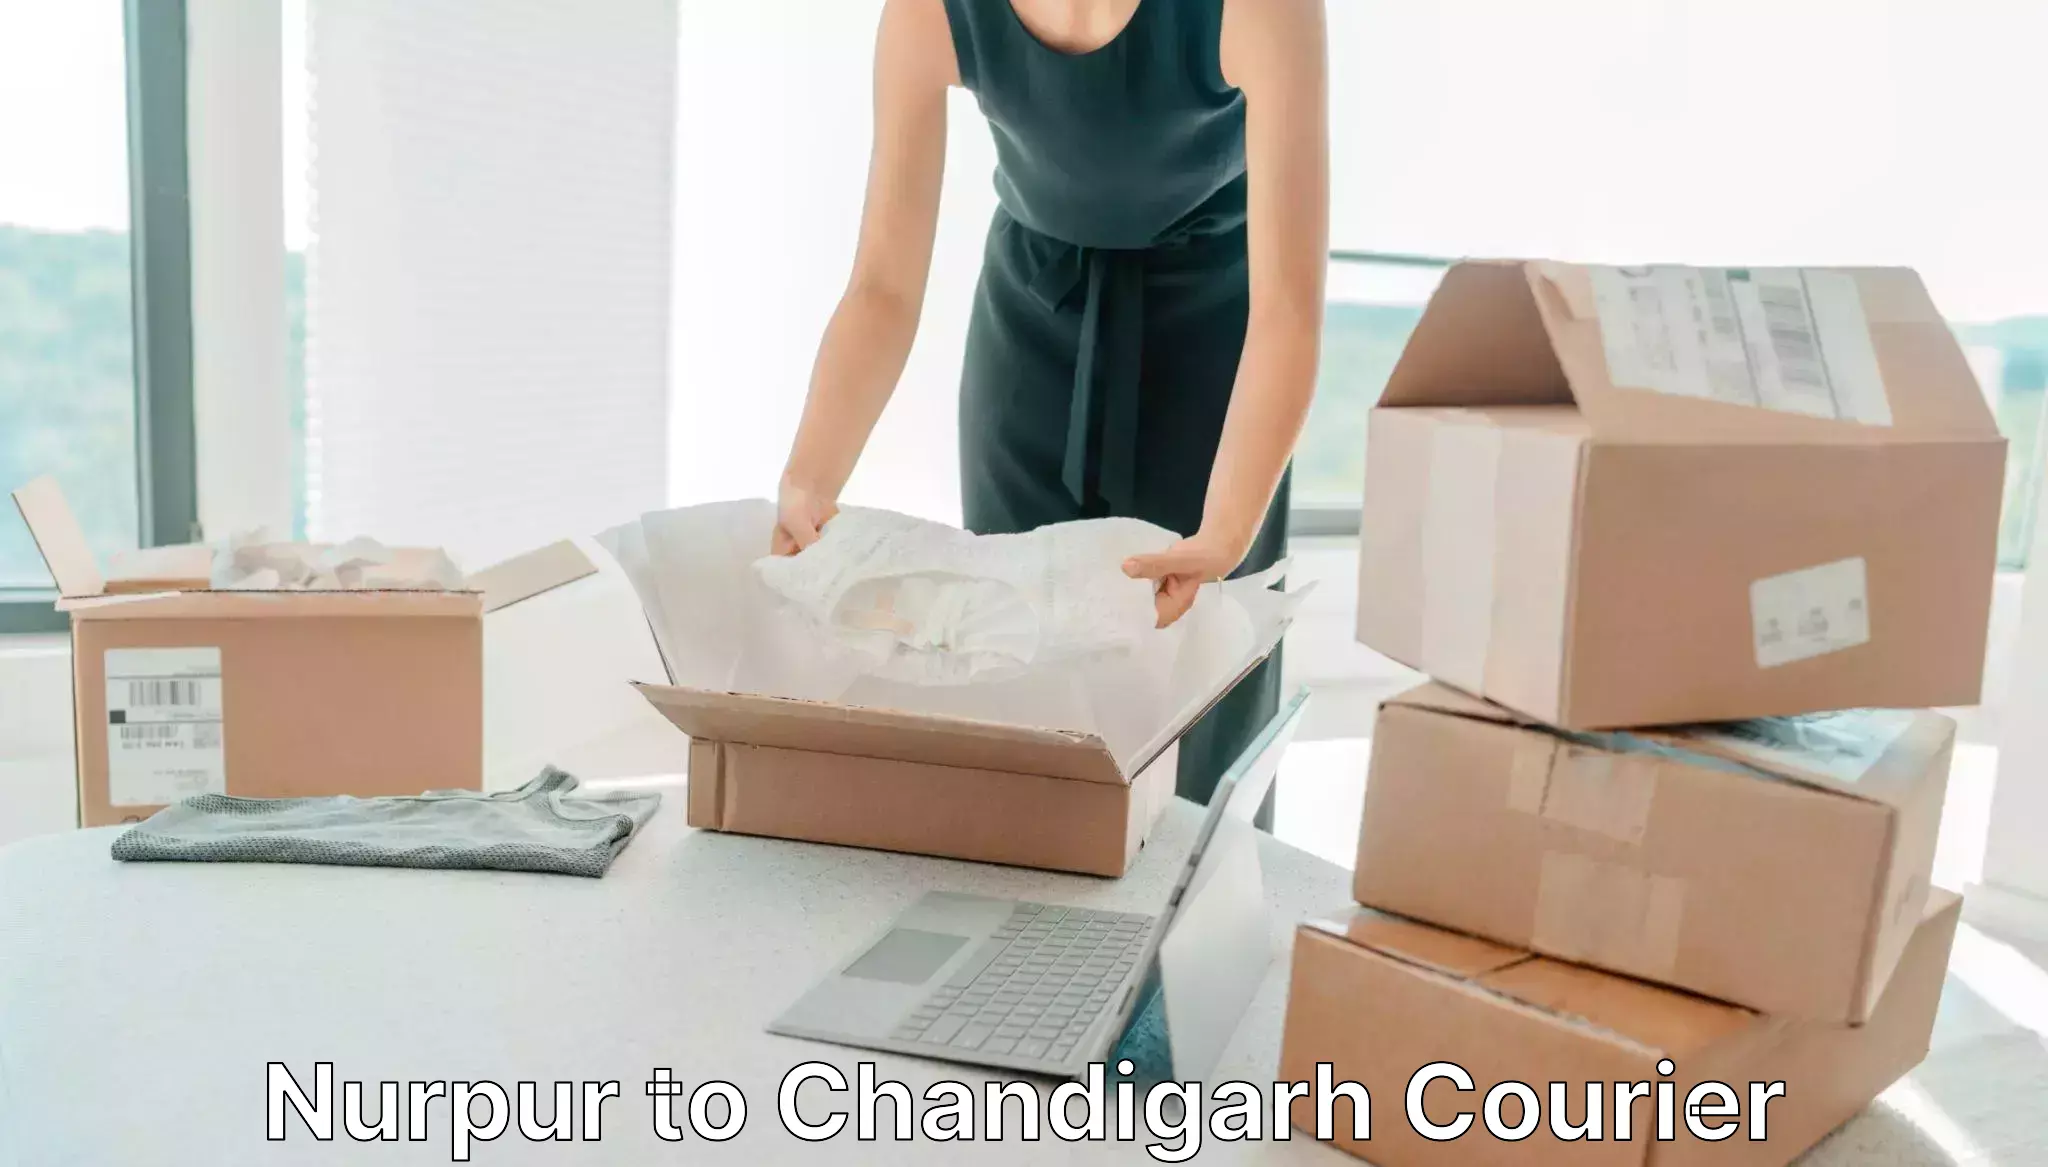 High-quality delivery services Nurpur to Chandigarh